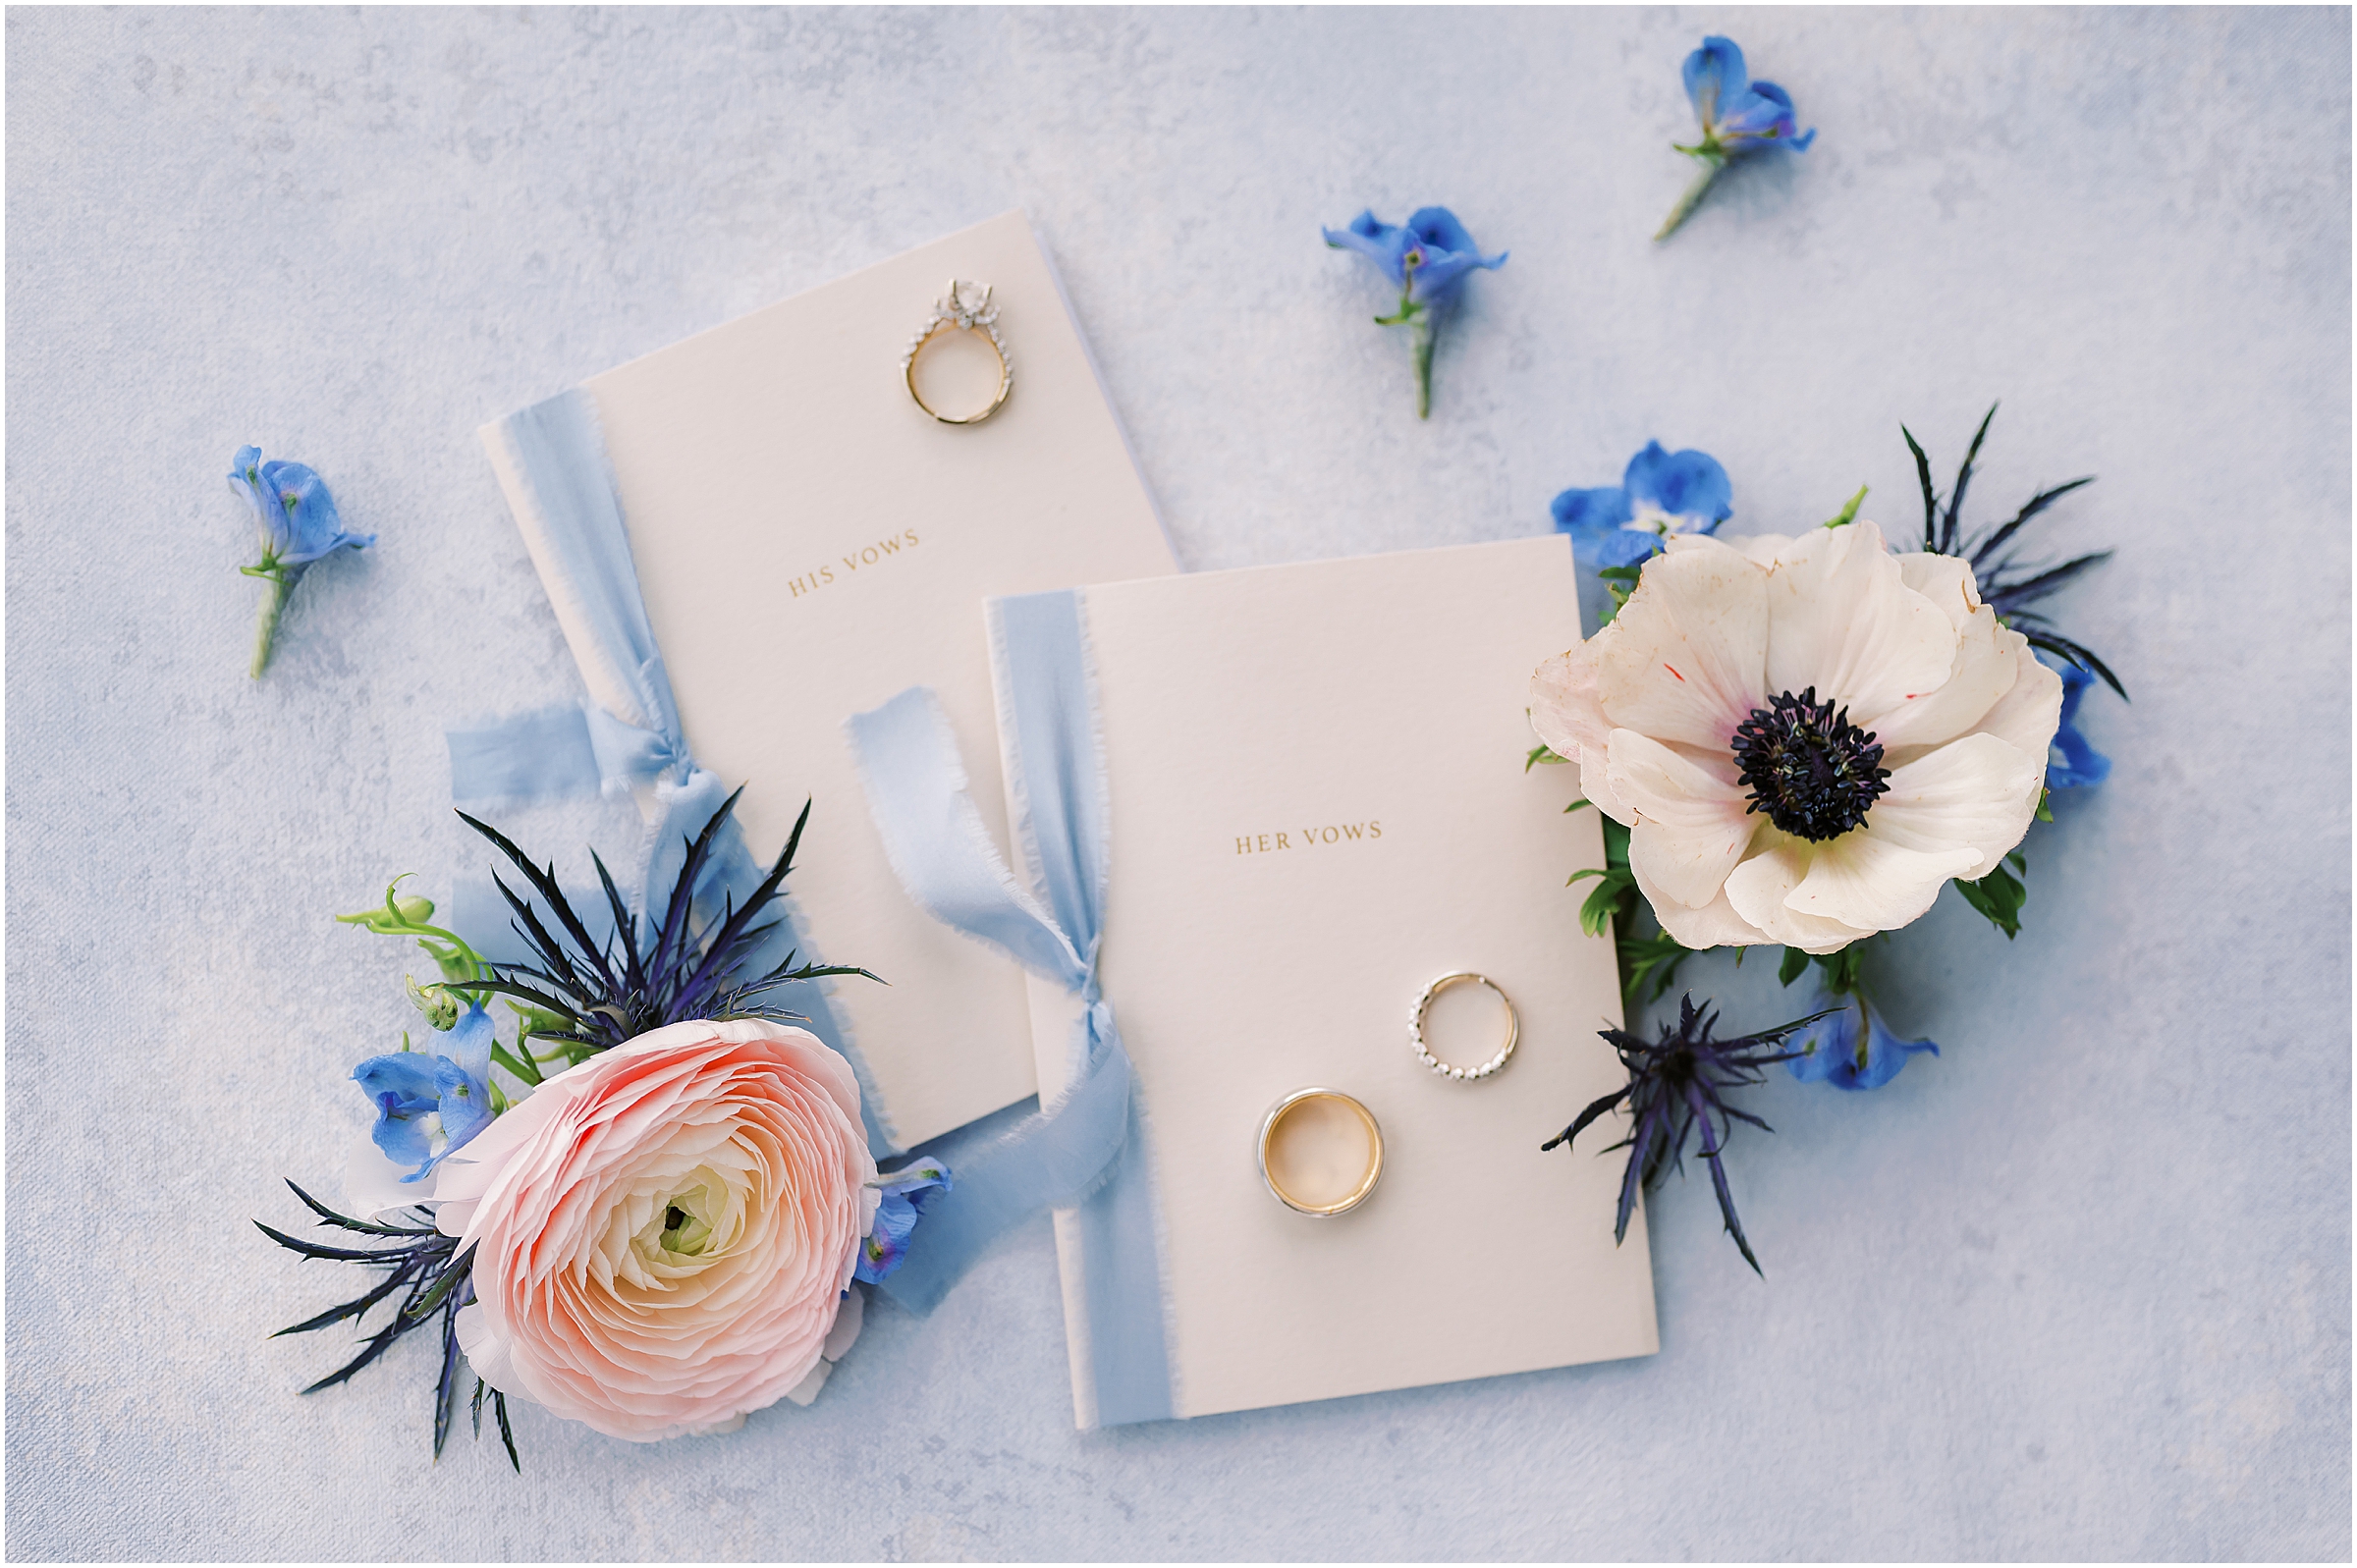 Wedding details - Rings and vow books with dusty blue ribbon